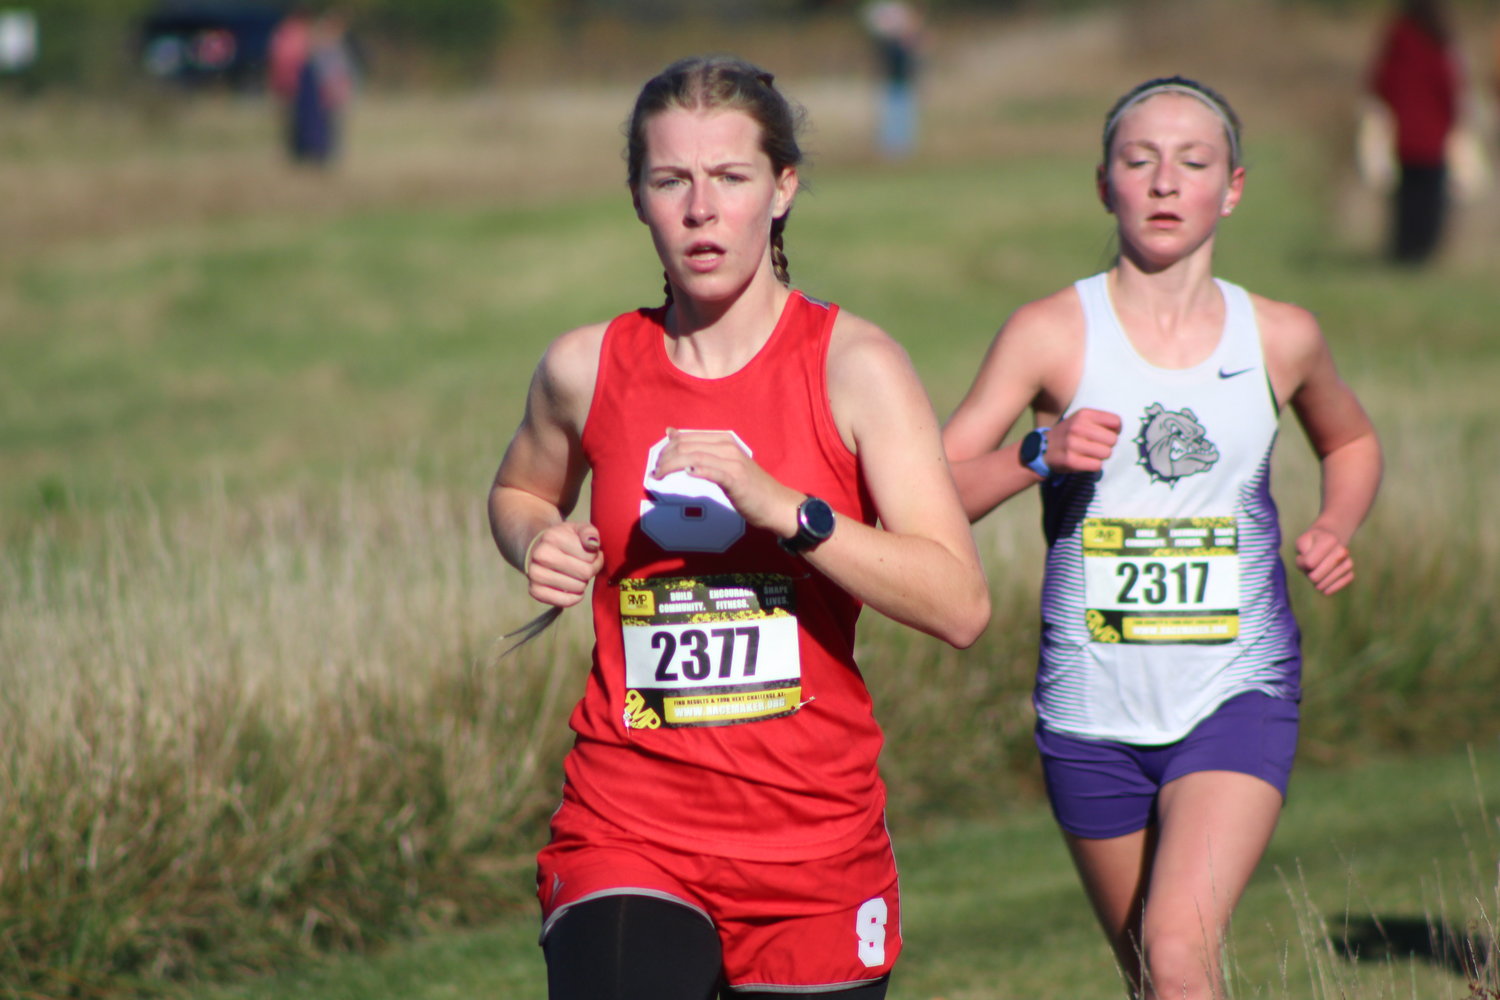 Southmont's Faith Allen raced to a close 4th place finish as she's back at the Regional and looks to continue her stellar senior season.